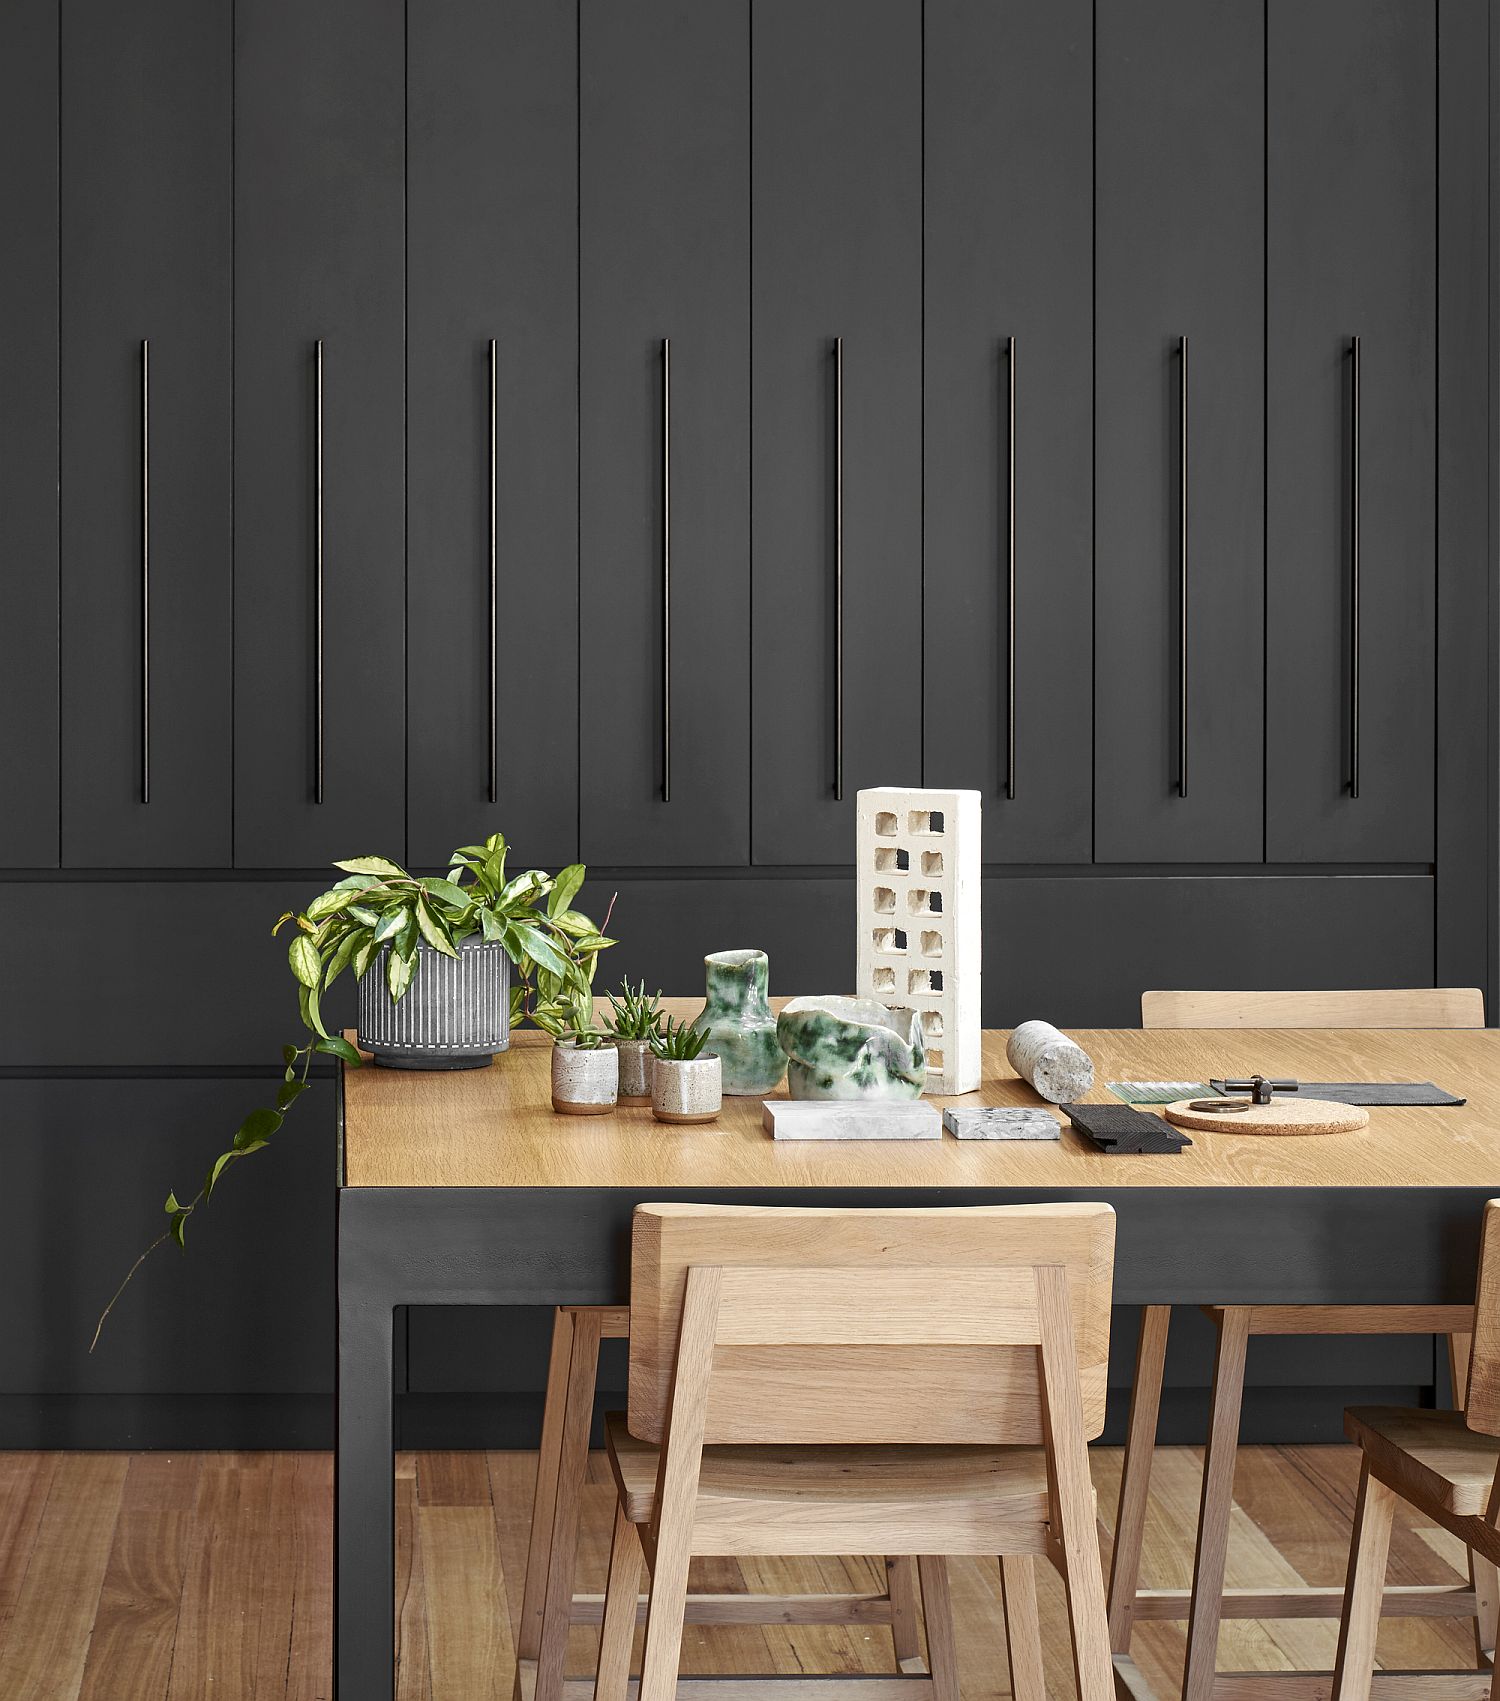 Dining area display with black backdrop and wooden dining table